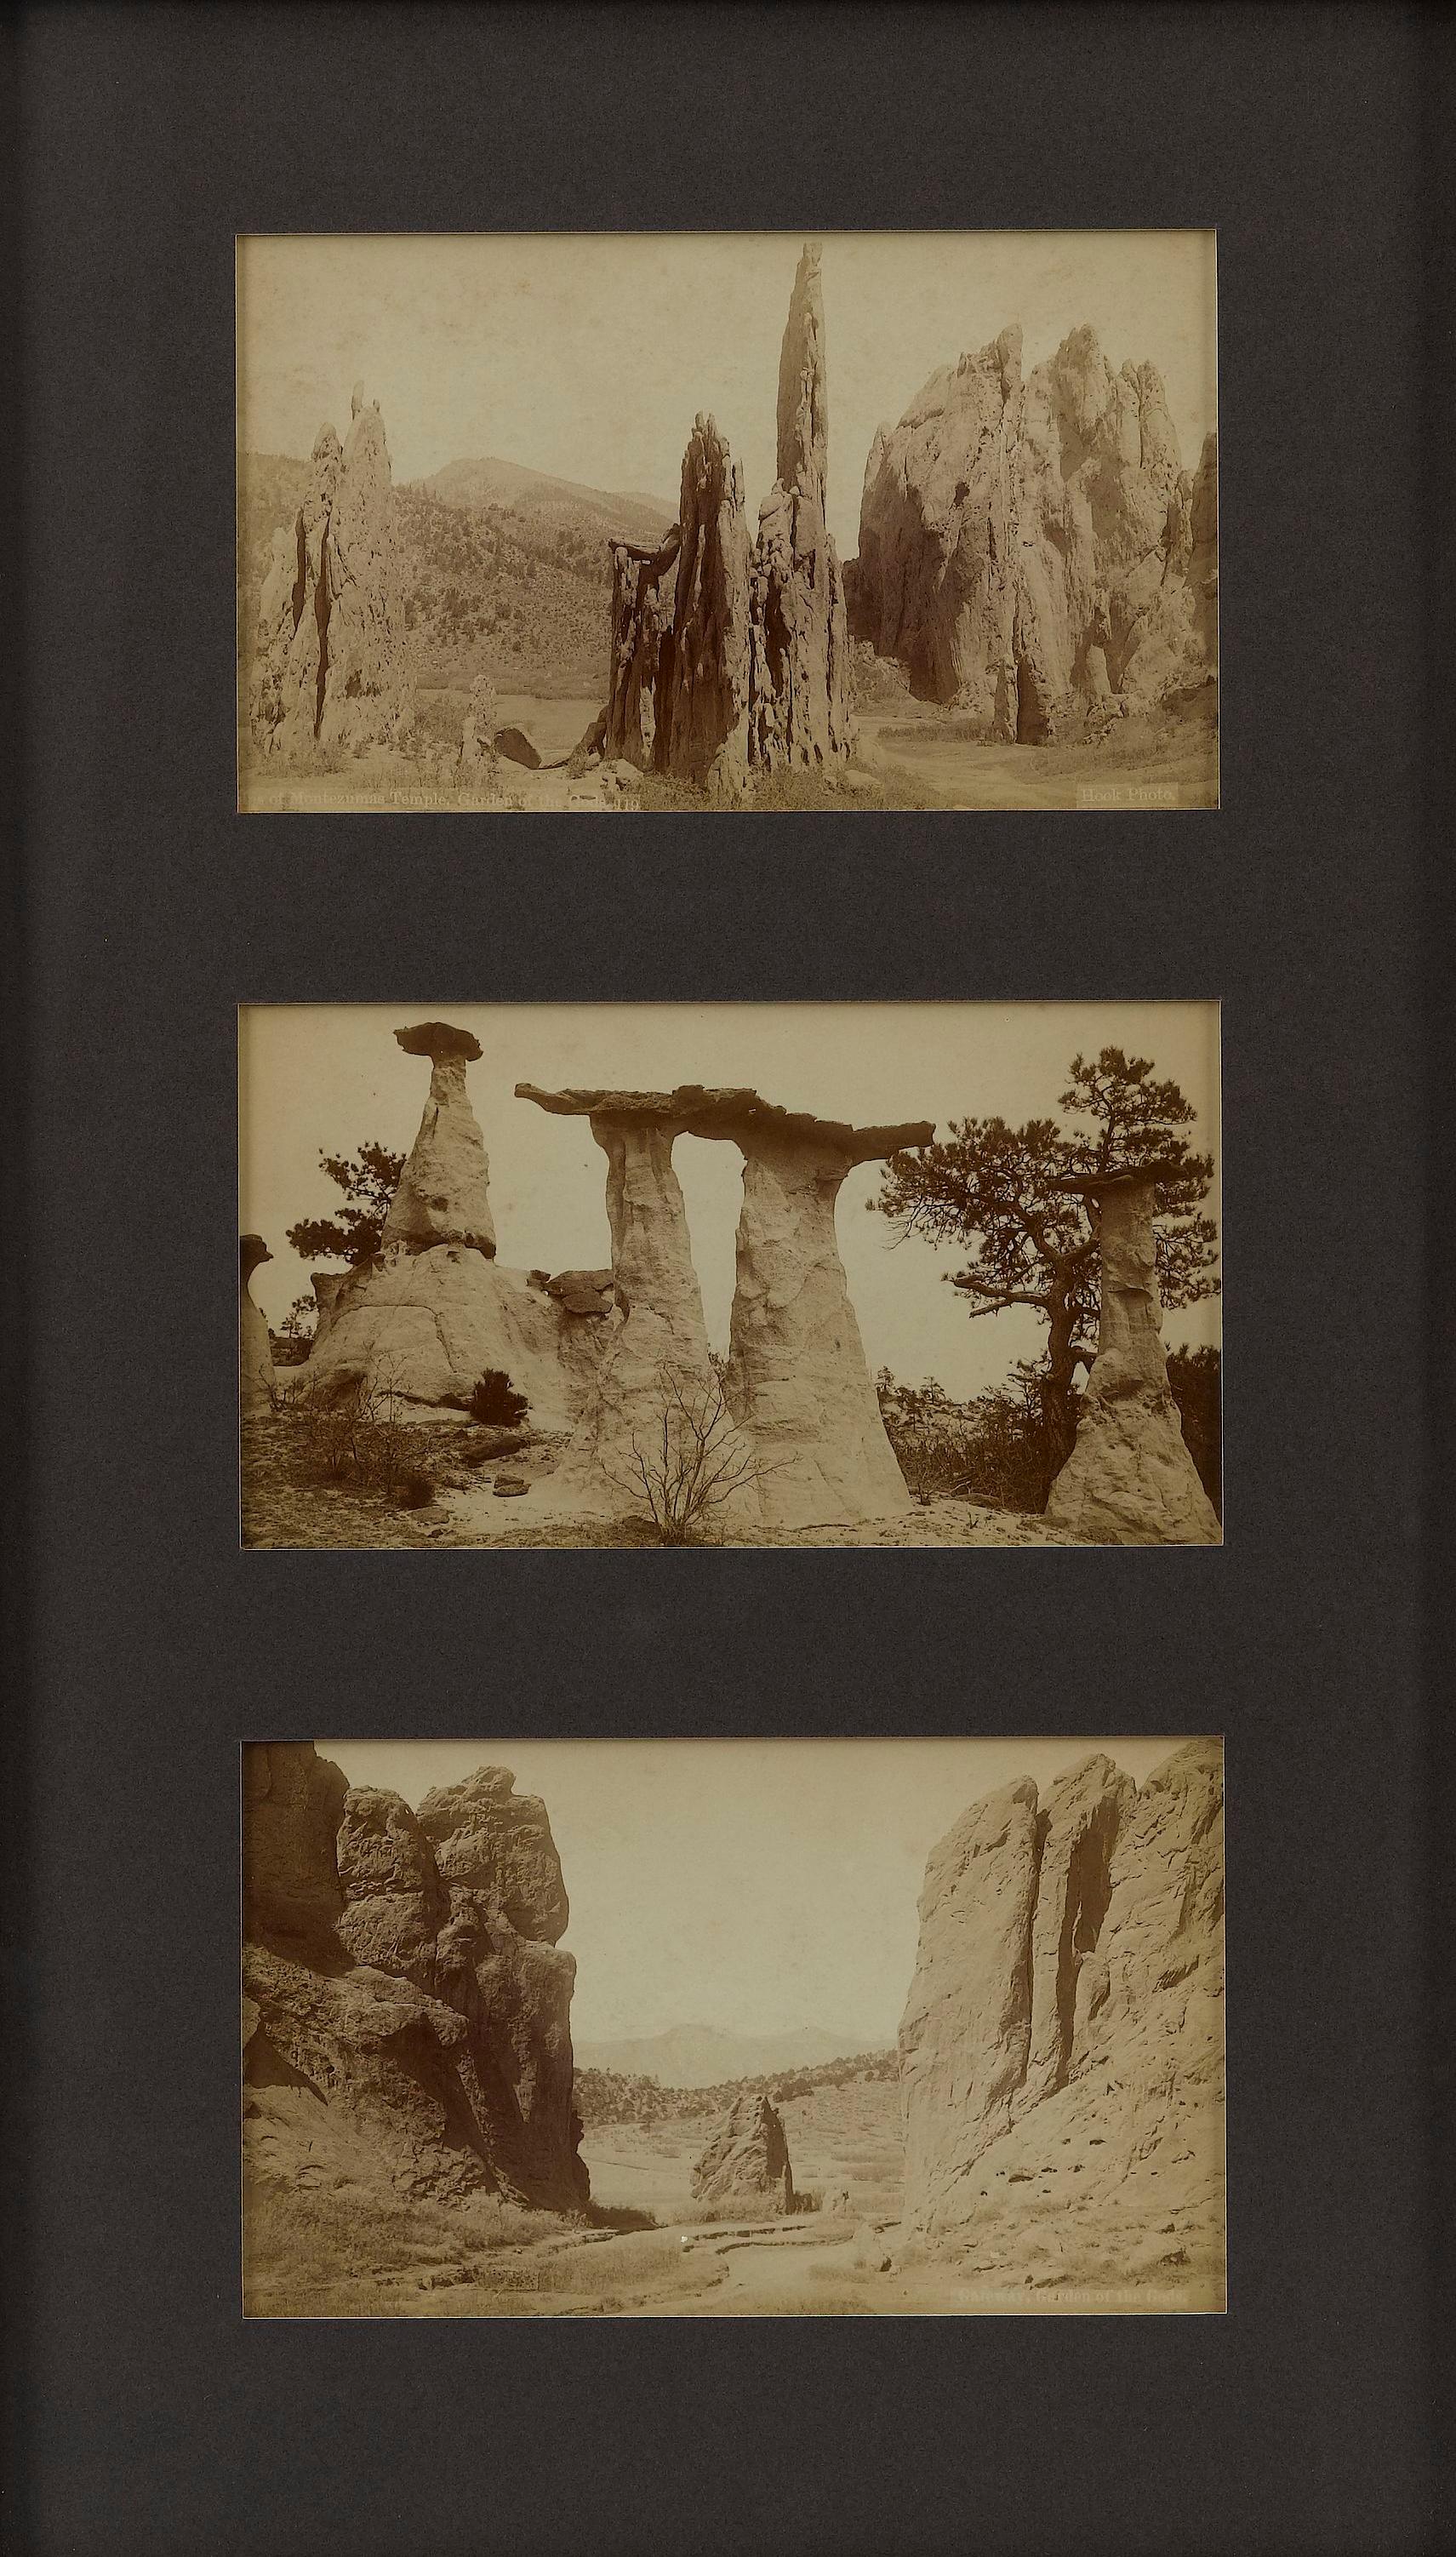 Paper Vintage Garden of the Gods Postcards by Hook Photo, 1890